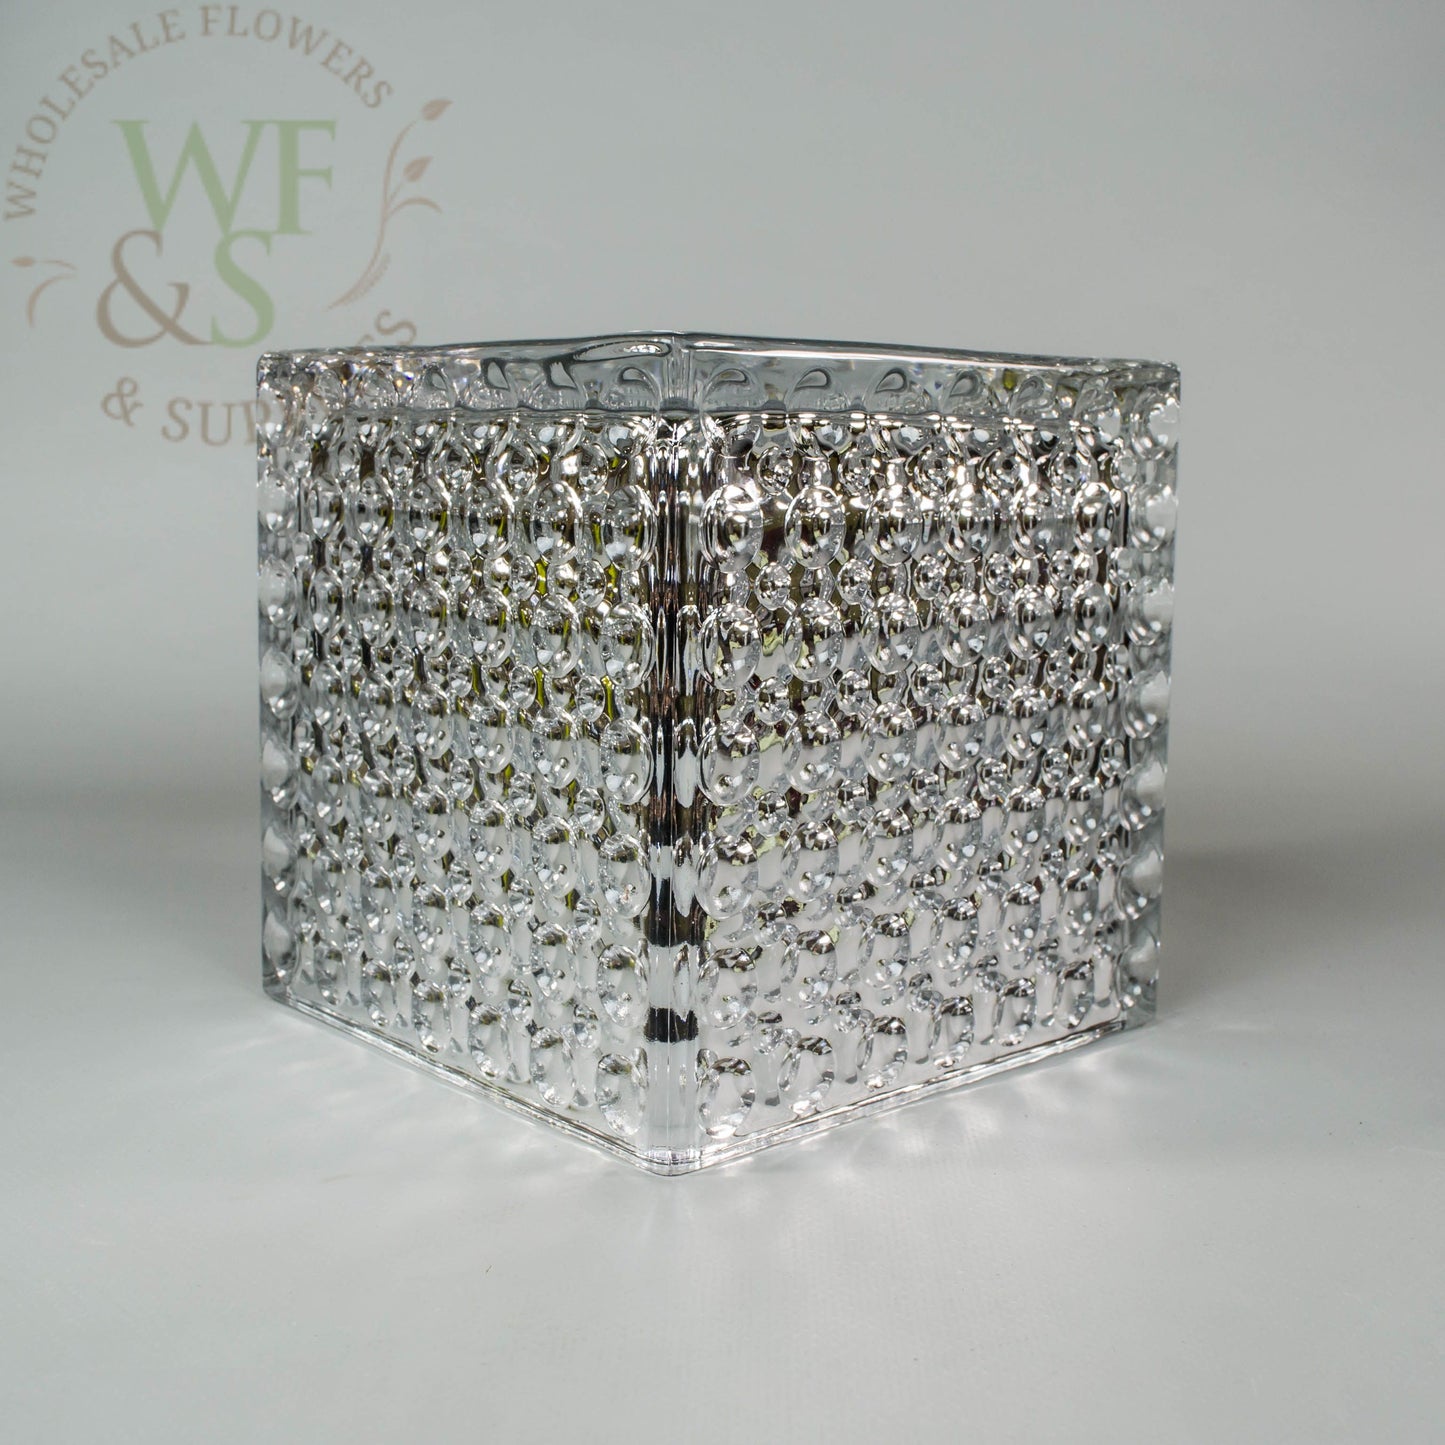 Square Silver Mirrored Glass Cube Vase Dimple Effect 5x5